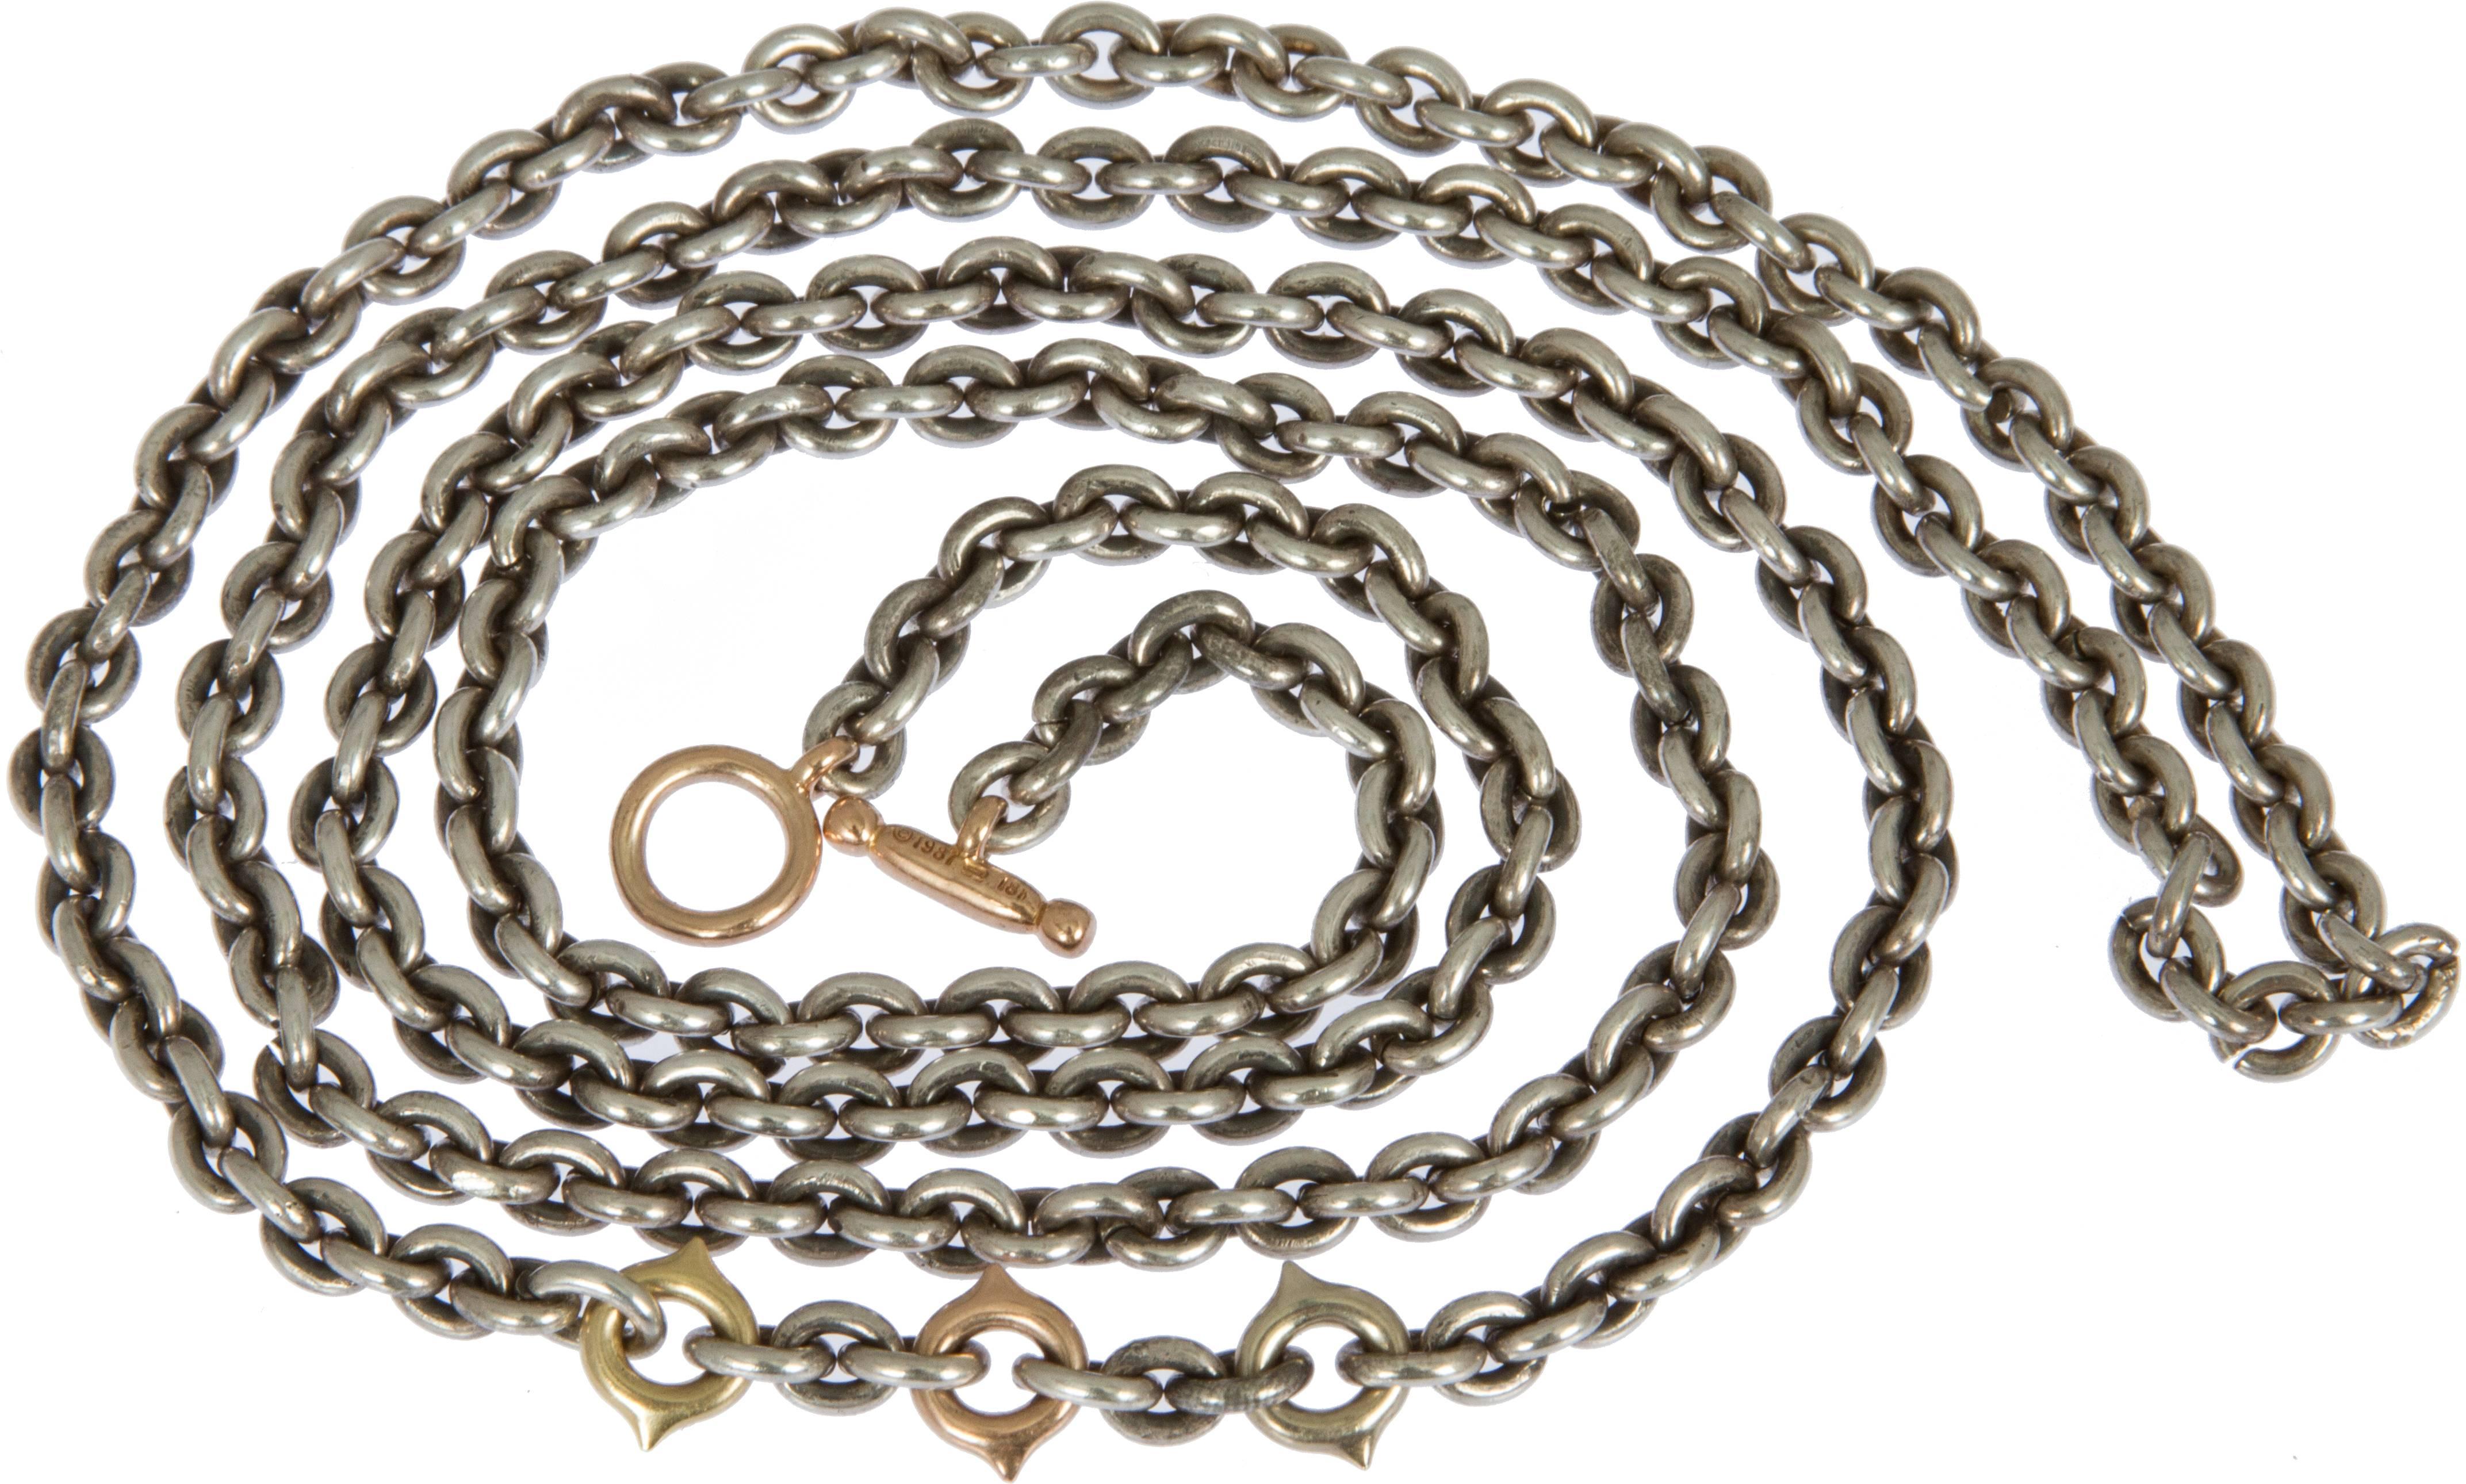 This interesting and versatile chain necklace that can be worn many ways. It has 18 karat gold elements interspersed.